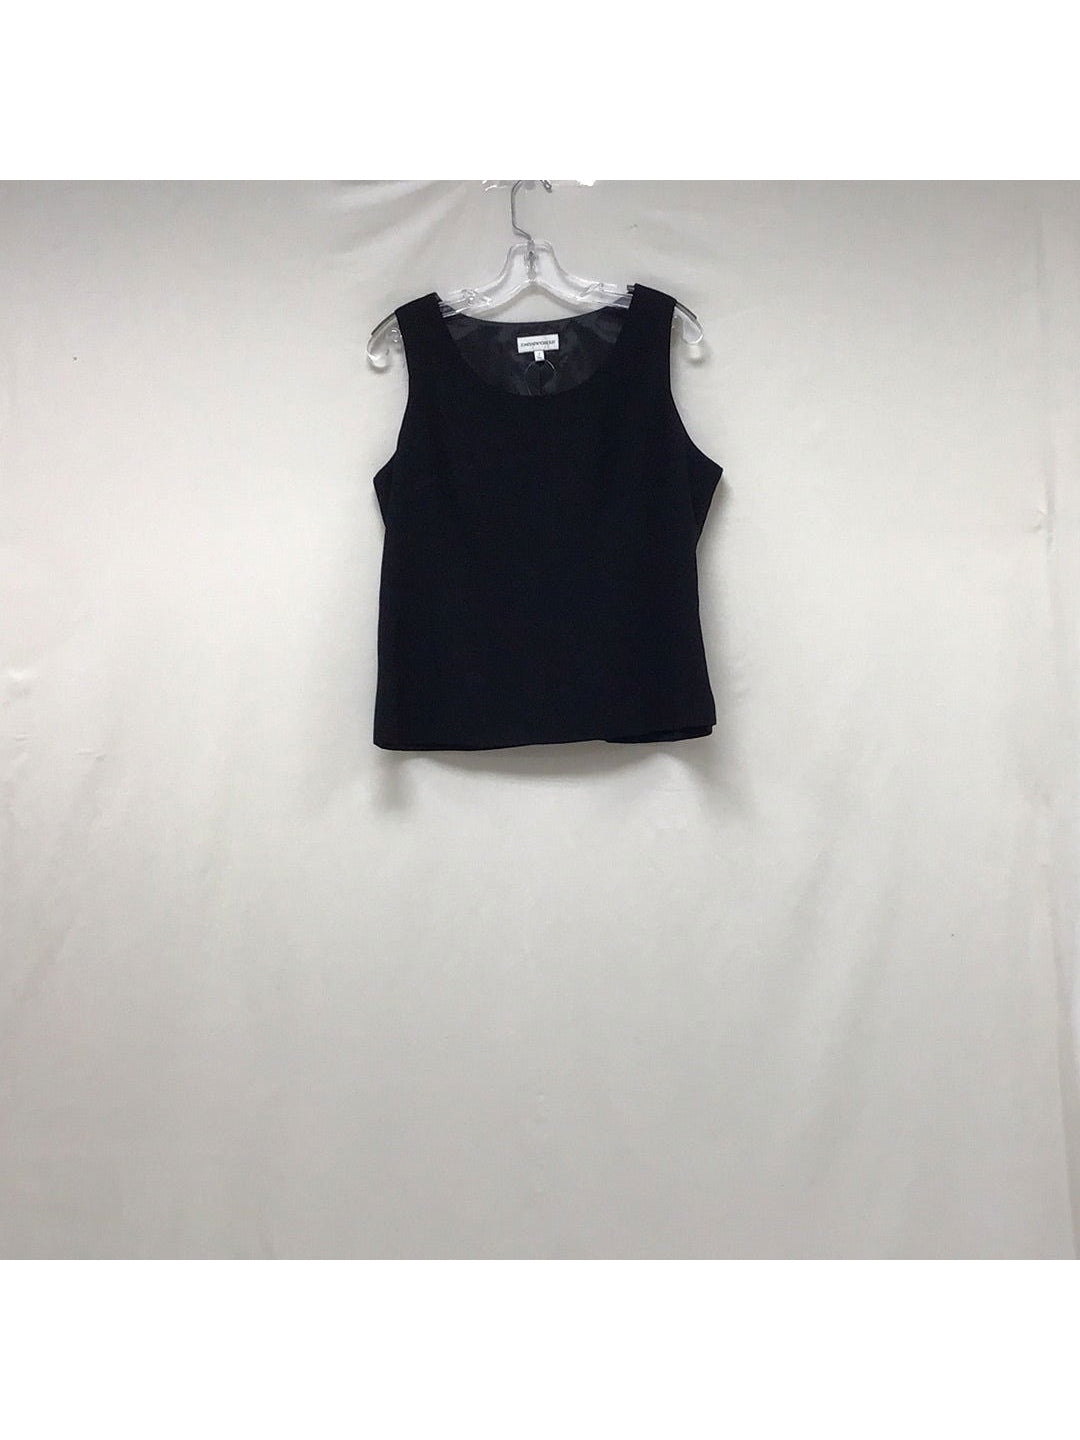 Jones New York Suit Women Black Sleeveless Top Size 12 - The Kennedy Collective Thrift - 